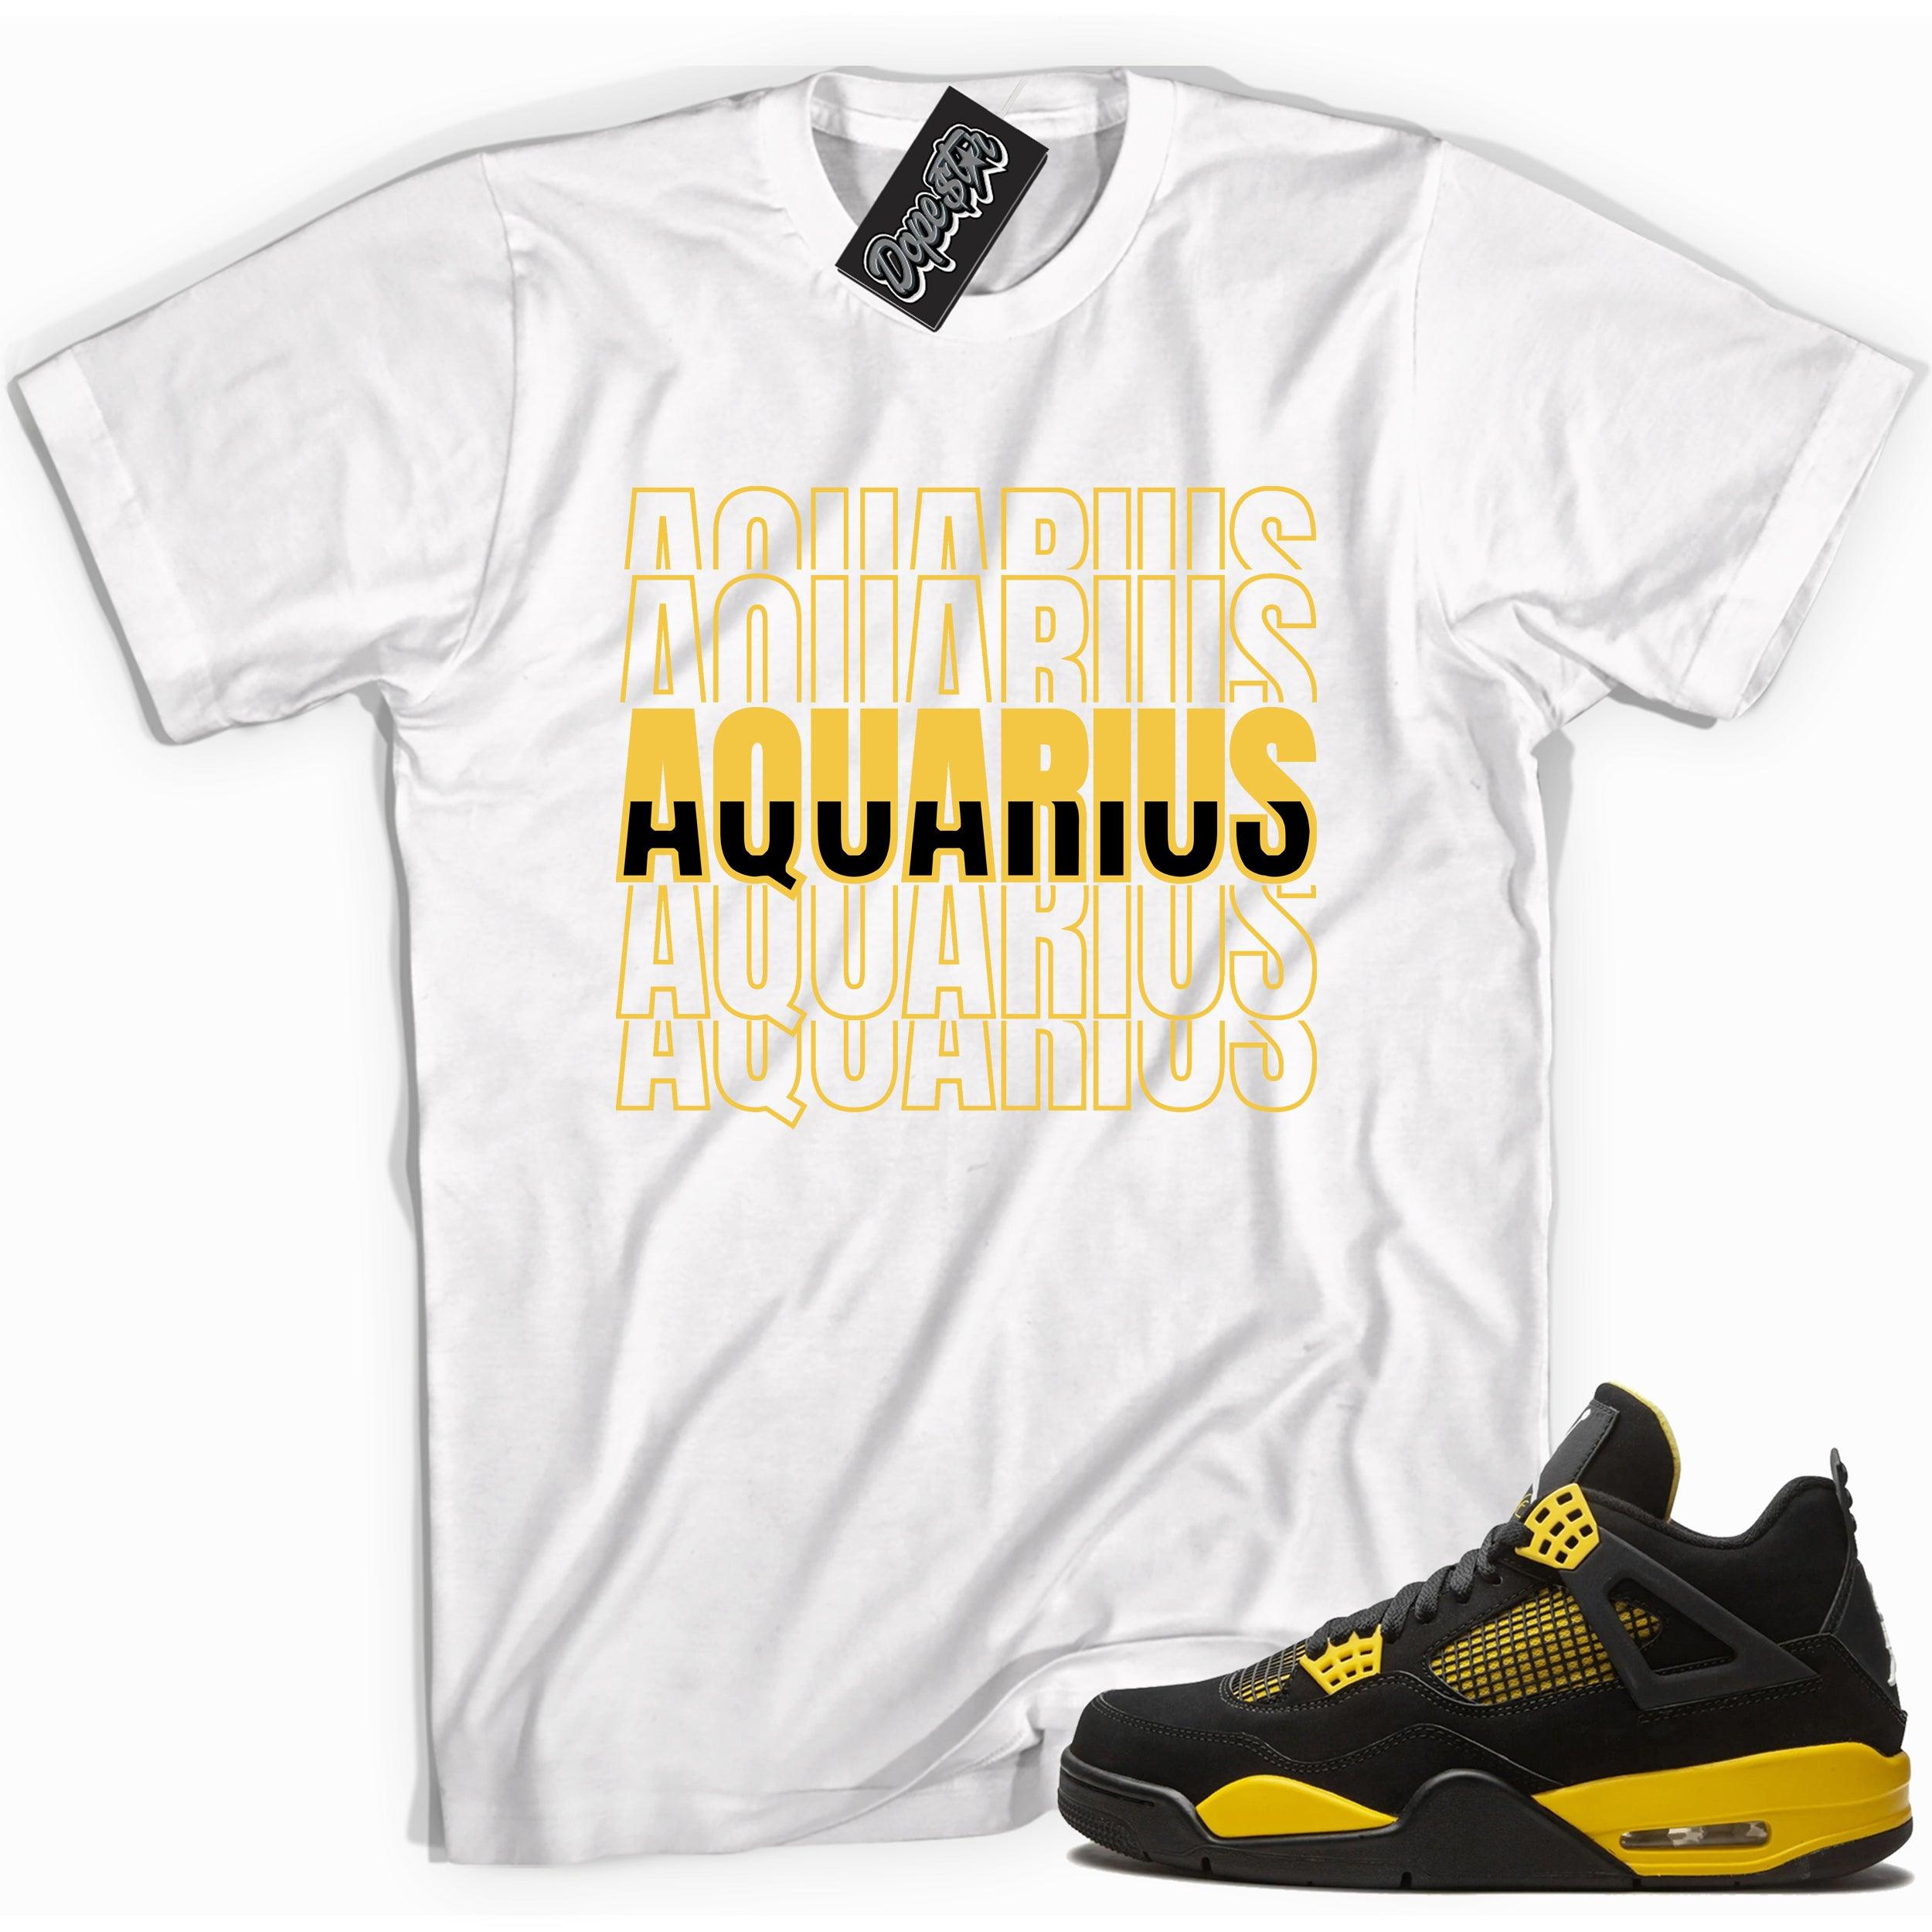 Cool white graphic tee with 'aquarius' print, that perfectly matches Air Jordan 4 Thunder sneakers